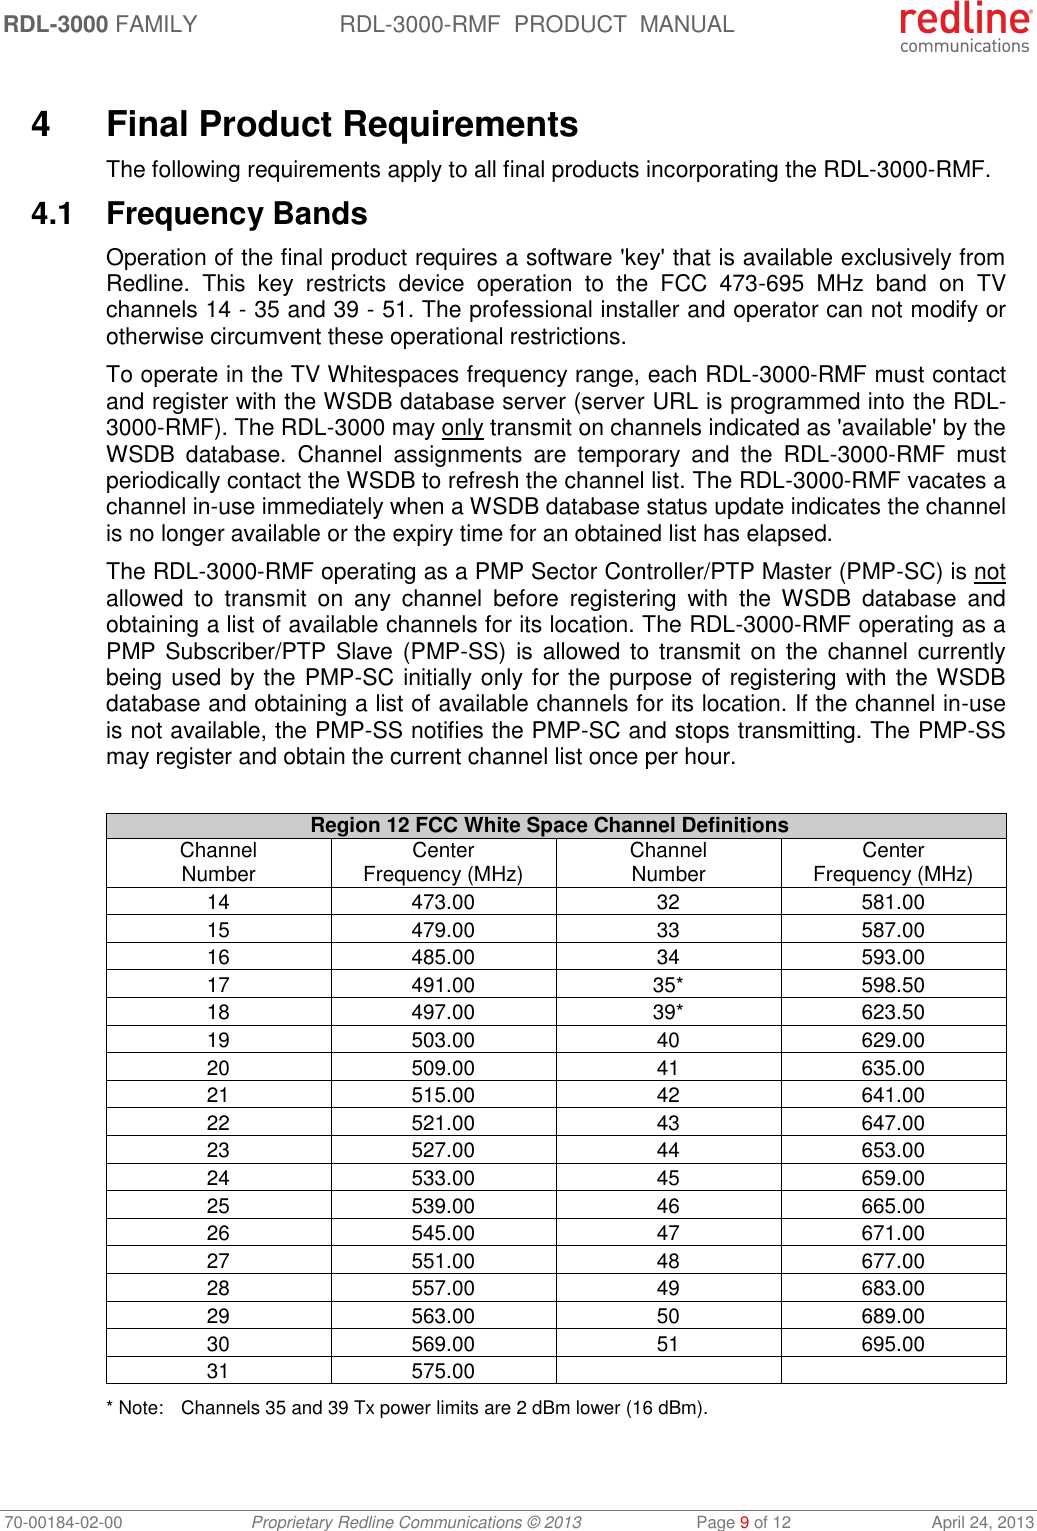 RDL-3000 FAMILY RDL-3000-RMF  PRODUCT  MANUAL 70-00184-02-00 Proprietary Redline Communications © 2013  Page 9 of 12  April 24, 2013  4  Final Product Requirements The following requirements apply to all final products incorporating the RDL-3000-RMF. 4.1  Frequency Bands Operation of the final product requires a software &apos;key&apos; that is available exclusively from Redline.  This  key  restricts  device  operation  to  the  FCC  473-695  MHz  band  on  TV channels 14 - 35 and 39 - 51. The professional installer and operator can not modify or otherwise circumvent these operational restrictions. To operate in the TV Whitespaces frequency range, each RDL-3000-RMF must contact and register with the WSDB database server (server URL is programmed into the RDL-3000-RMF). The RDL-3000 may only transmit on channels indicated as &apos;available&apos; by the WSDB  database.  Channel  assignments  are  temporary  and  the  RDL-3000-RMF  must periodically contact the WSDB to refresh the channel list. The RDL-3000-RMF vacates a channel in-use immediately when a WSDB database status update indicates the channel is no longer available or the expiry time for an obtained list has elapsed. The RDL-3000-RMF operating as a PMP Sector Controller/PTP Master (PMP-SC) is not allowed  to  transmit  on  any  channel  before  registering  with  the  WSDB  database  and obtaining a list of available channels for its location. The RDL-3000-RMF operating as a PMP Subscriber/PTP  Slave (PMP-SS) is allowed  to transmit on the channel  currently being used by the PMP-SC initially only for the purpose of registering with the WSDB database and obtaining a list of available channels for its location. If the channel in-use is not available, the PMP-SS notifies the PMP-SC and stops transmitting. The PMP-SS may register and obtain the current channel list once per hour.  Region 12 FCC White Space Channel Definitions Channel Number Center Frequency (MHz) Channel Number Center Frequency (MHz) 14 473.00 32 581.00 15 479.00 33 587.00 16 485.00 34 593.00 17 491.00 35* 598.50 18 497.00 39* 623.50 19 503.00 40 629.00 20 509.00 41 635.00 21 515.00 42 641.00 22 521.00 43 647.00 23 527.00 44 653.00 24 533.00 45 659.00 25 539.00 46 665.00 26 545.00 47 671.00 27 551.00 48 677.00 28 557.00 49 683.00 29 563.00 50 689.00 30 569.00 51 695.00 31 575.00   * Note:  Channels 35 and 39 Tx power limits are 2 dBm lower (16 dBm).  